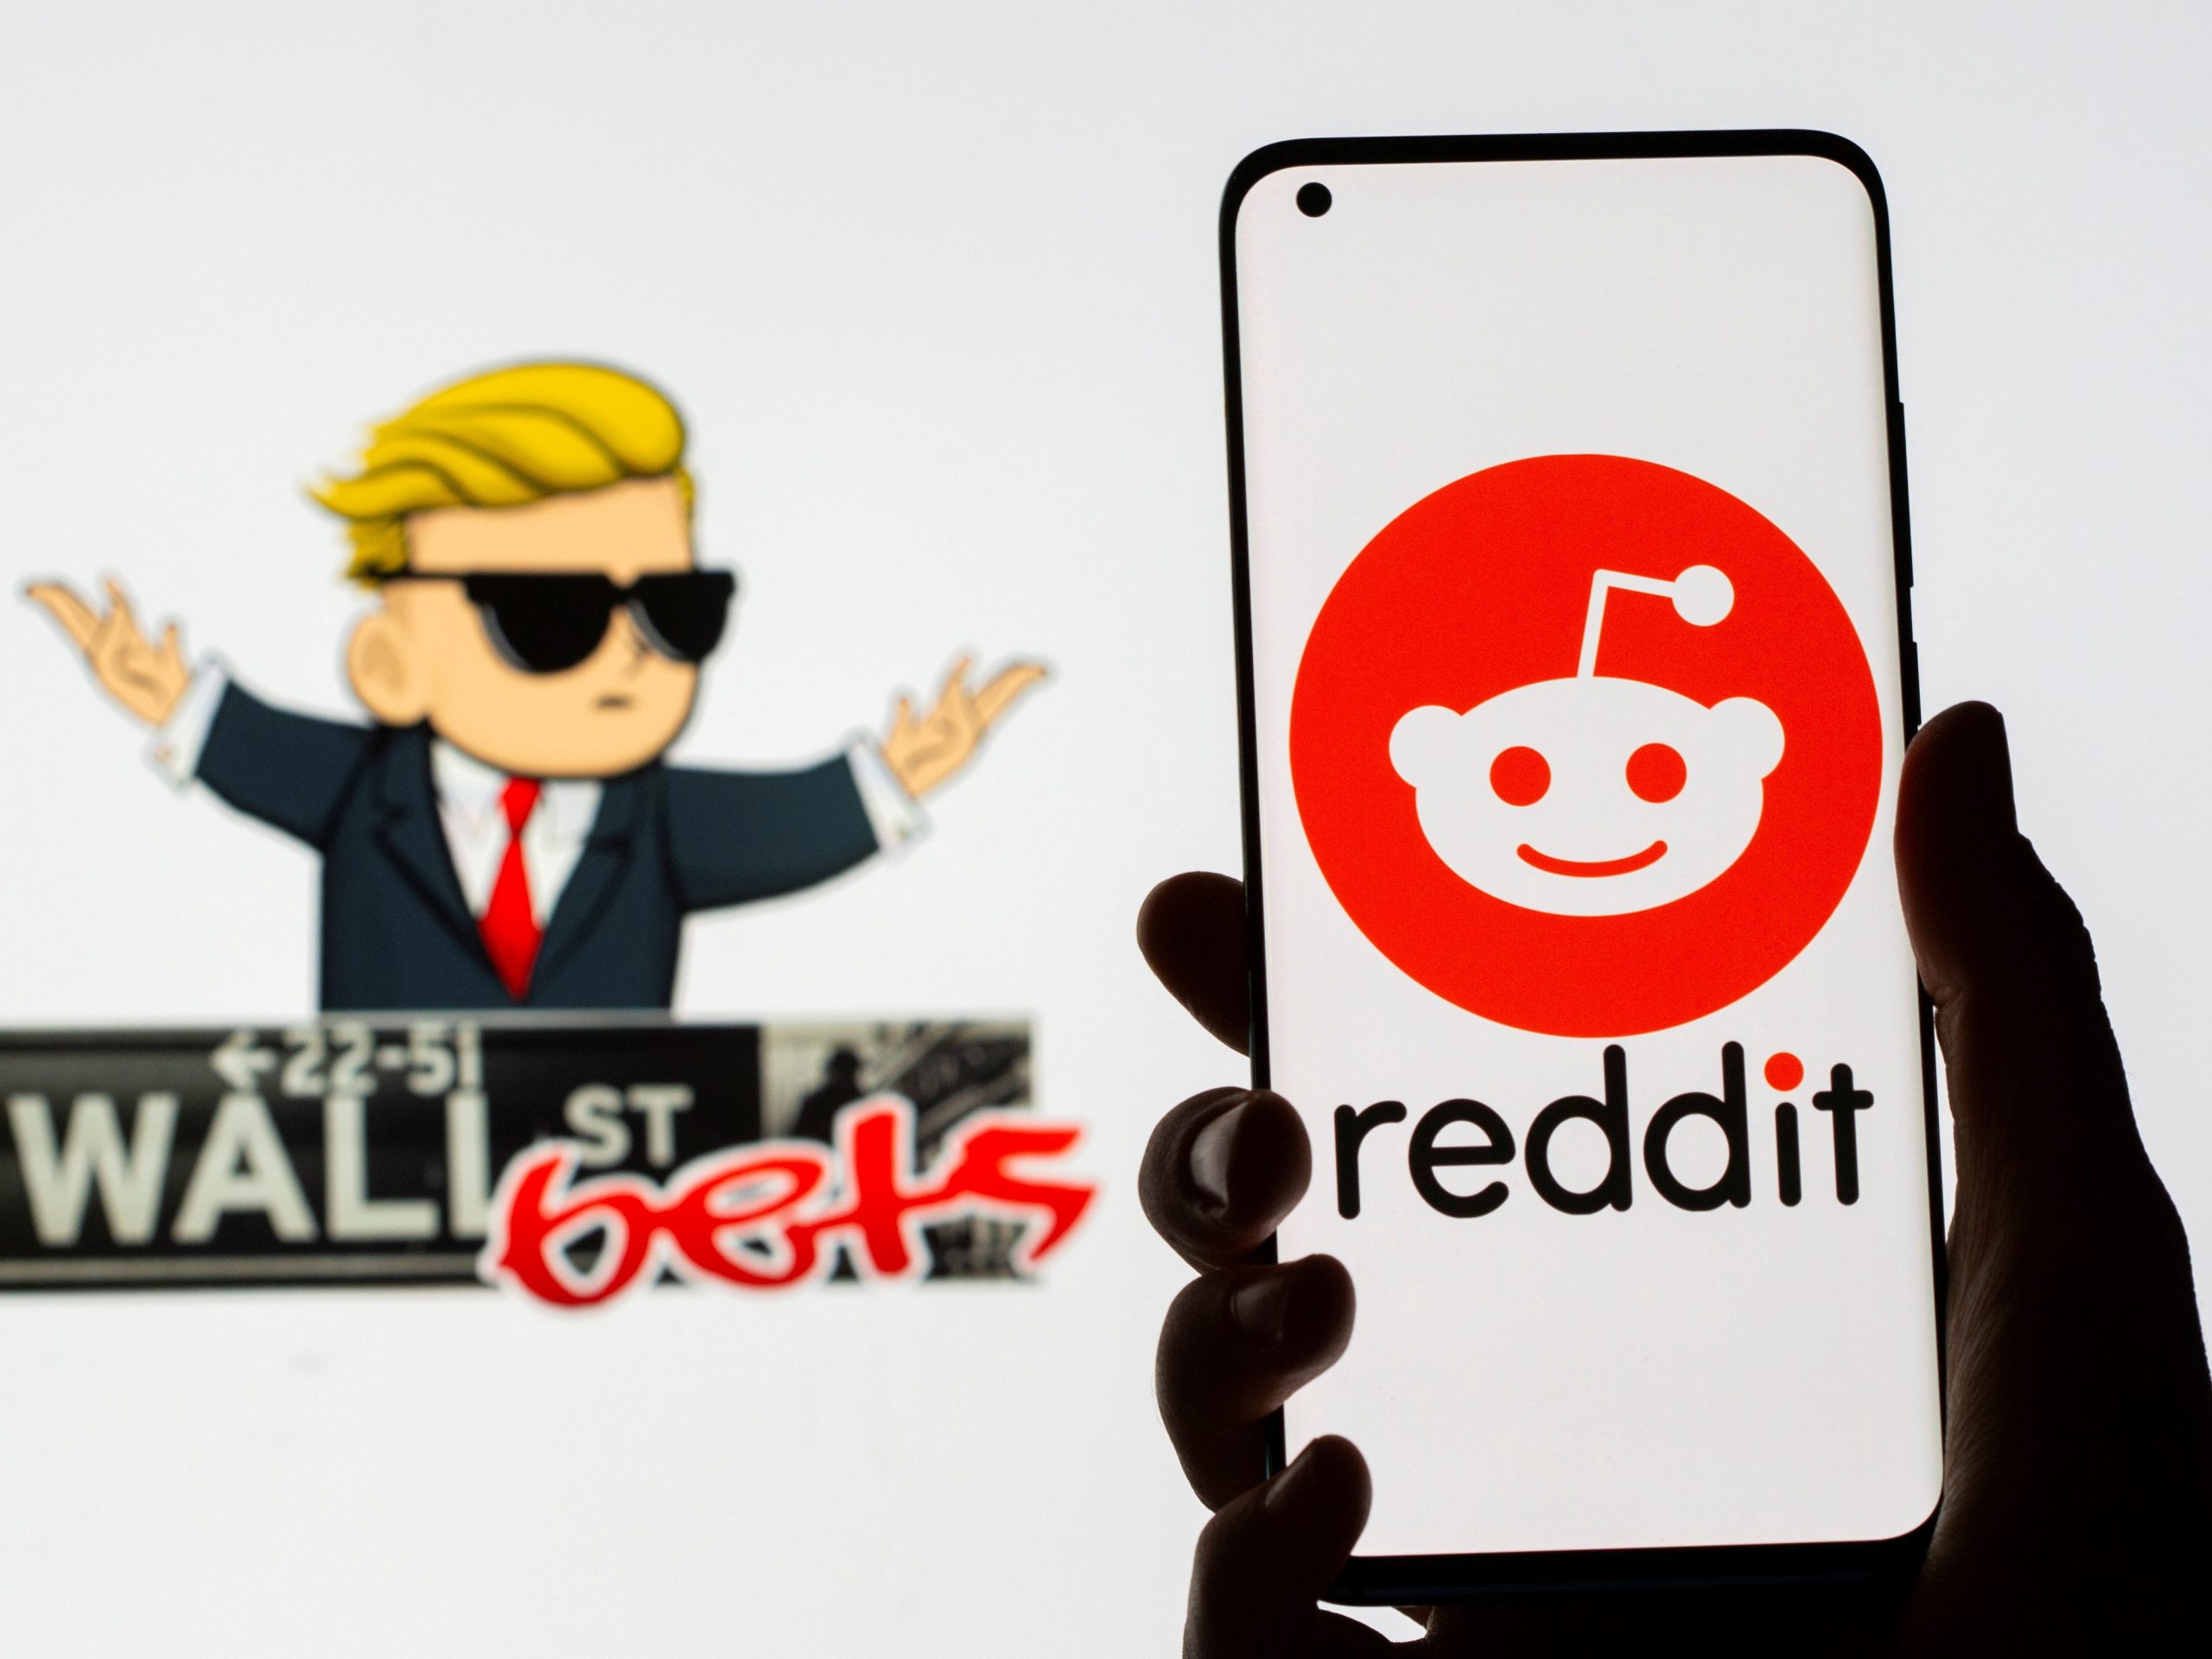 The Reddit logo is seen on a smartphone in front of a displayed Wall Street Bets logo in this illustration taken January 28, 2021.